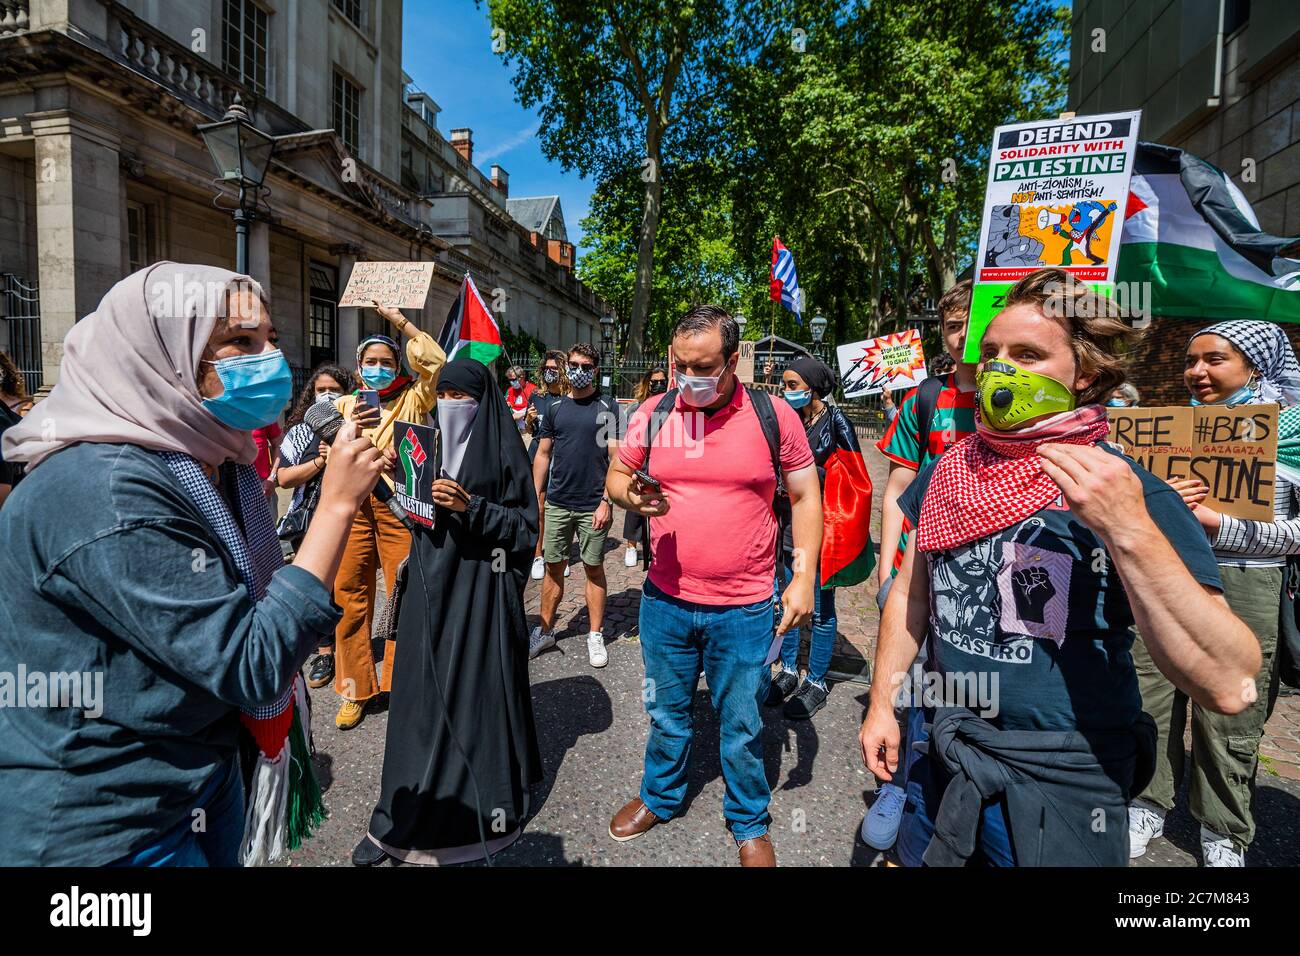 London, UK. 18th July, 2020. Demonstration at the Israeli embassy calling for - Opposition to Israel's annexation plan in the West Bank; Opposition to the censorship of anti-Zionism in Britain; and Support for a call for Boycotts, Divestment and Sanctions against Israel. Credit: Guy Bell/Alamy Live News Stock Photo